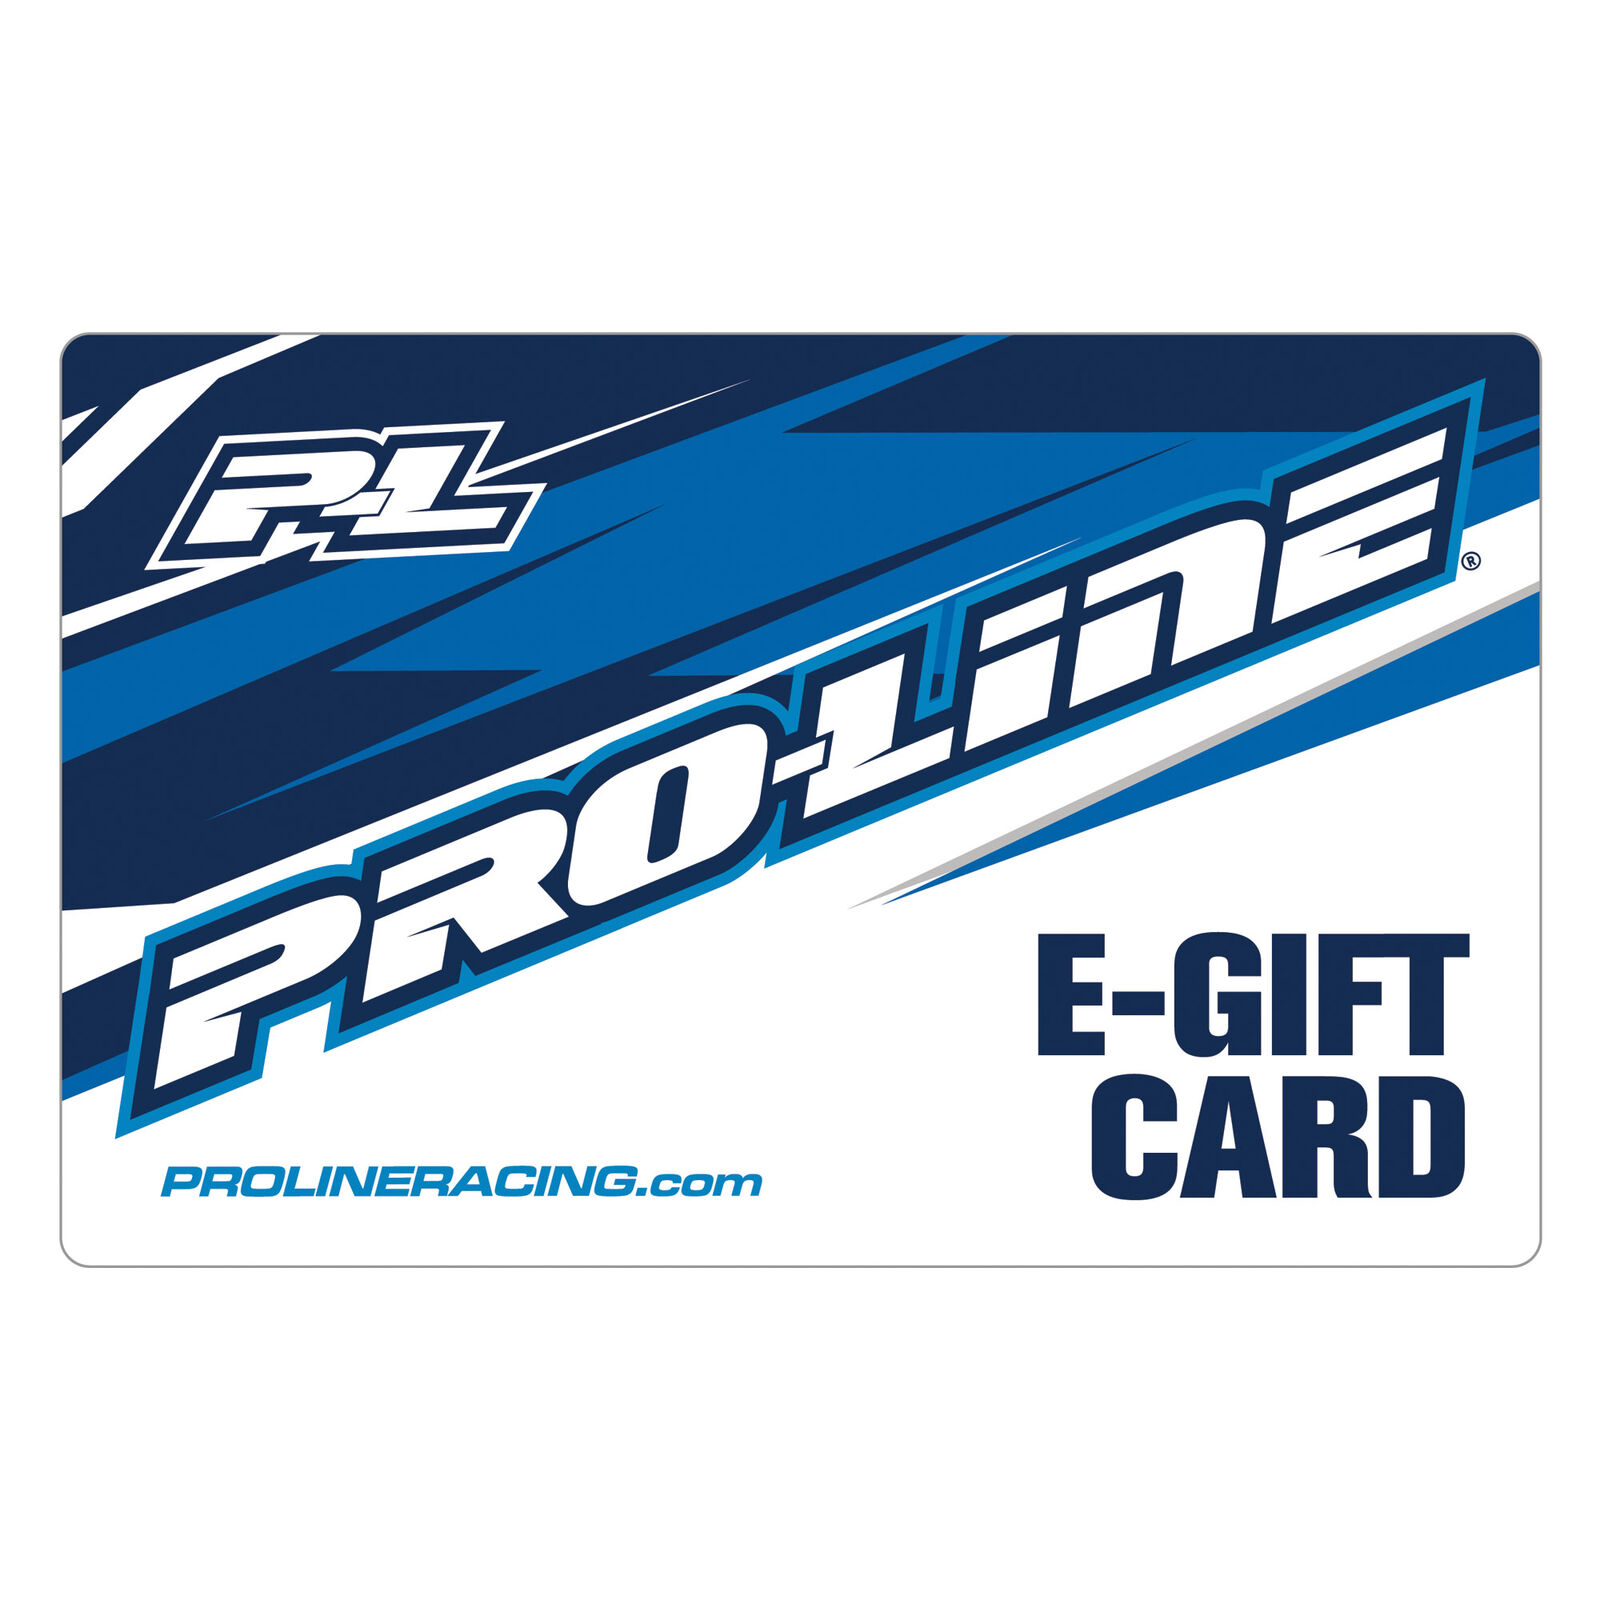 E-Gift Card $25 (emailed)